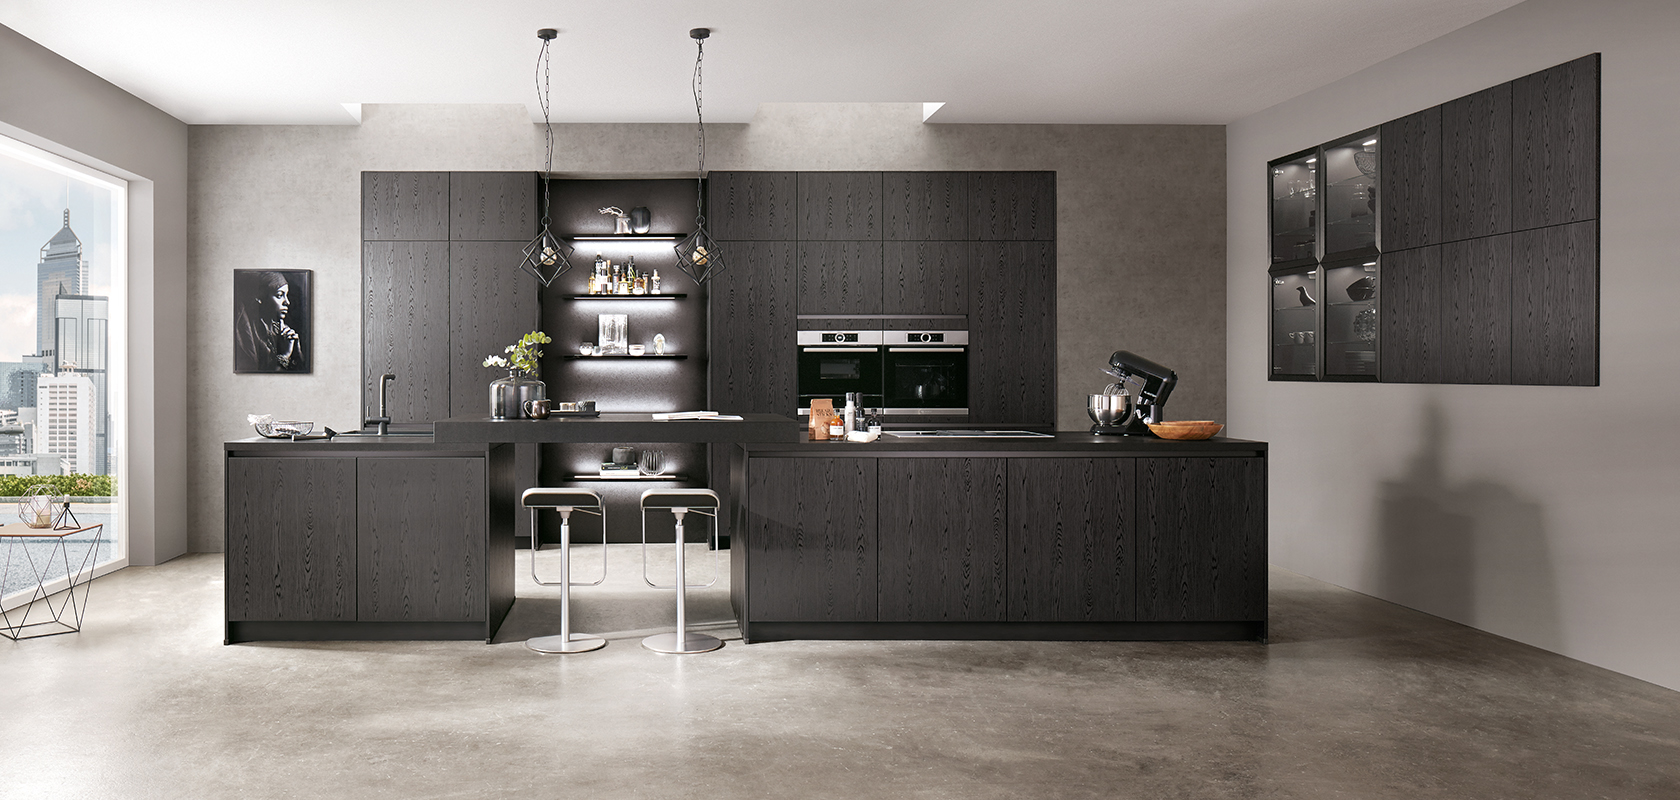 Modern kitchen design featuring sleek black cabinetry, stainless steel appliances, and a central island with bar stools against a backdrop of gray concrete textures.